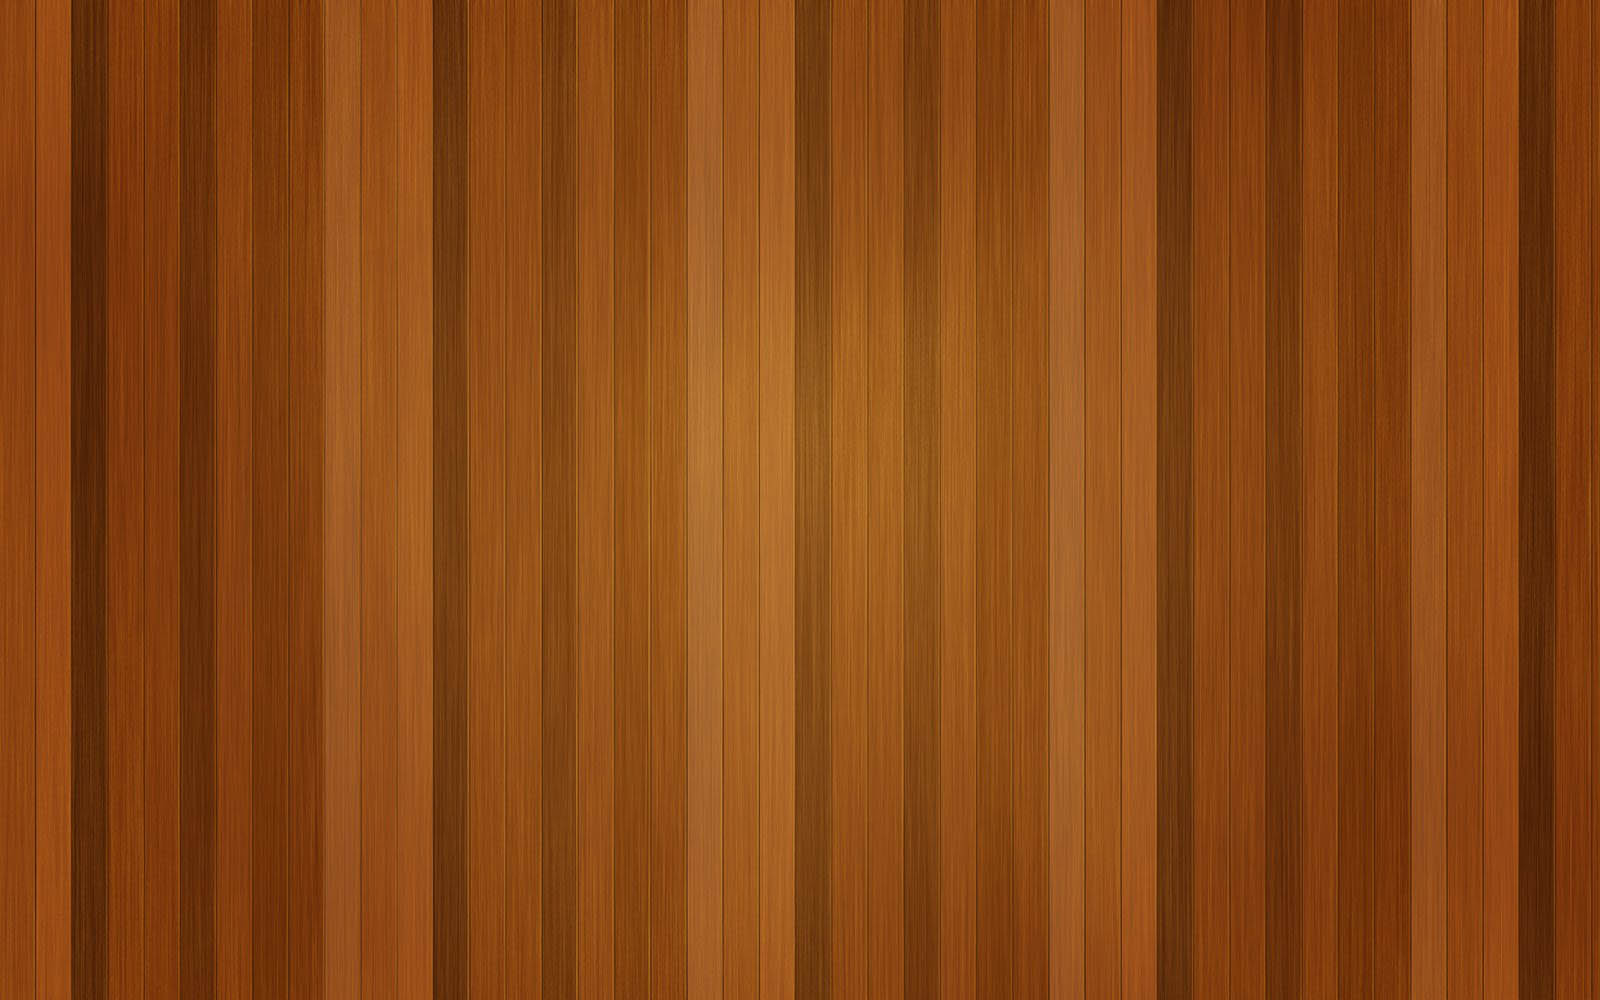 Tag Wood Wallpaper Image Photos Pictures And Background For